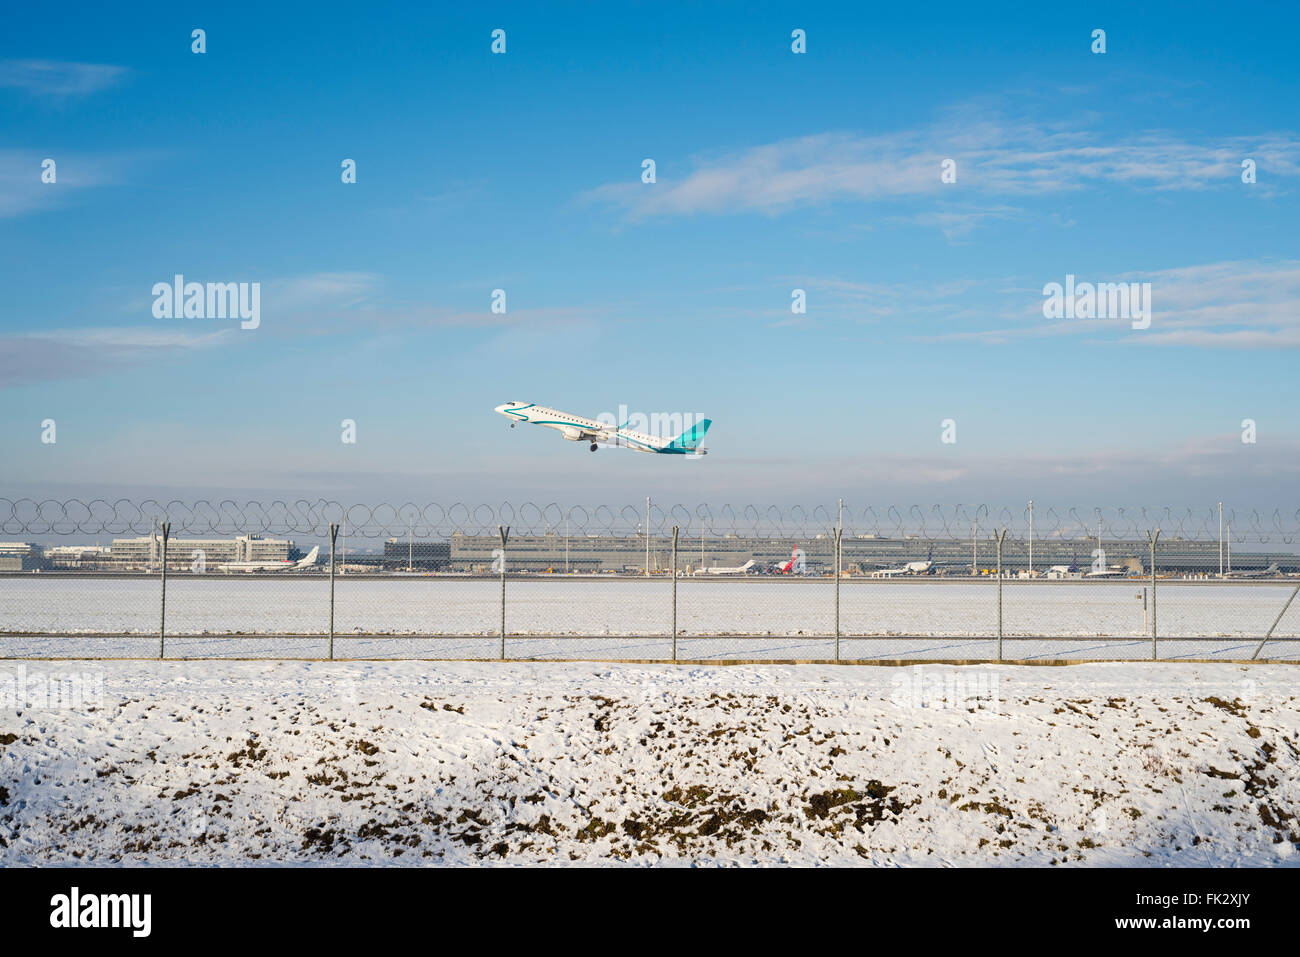 Embraer ERJ 195 airplane takes off at Munich Airport south runway on a sunny winter afternoon - all Logos removed Stock Photo